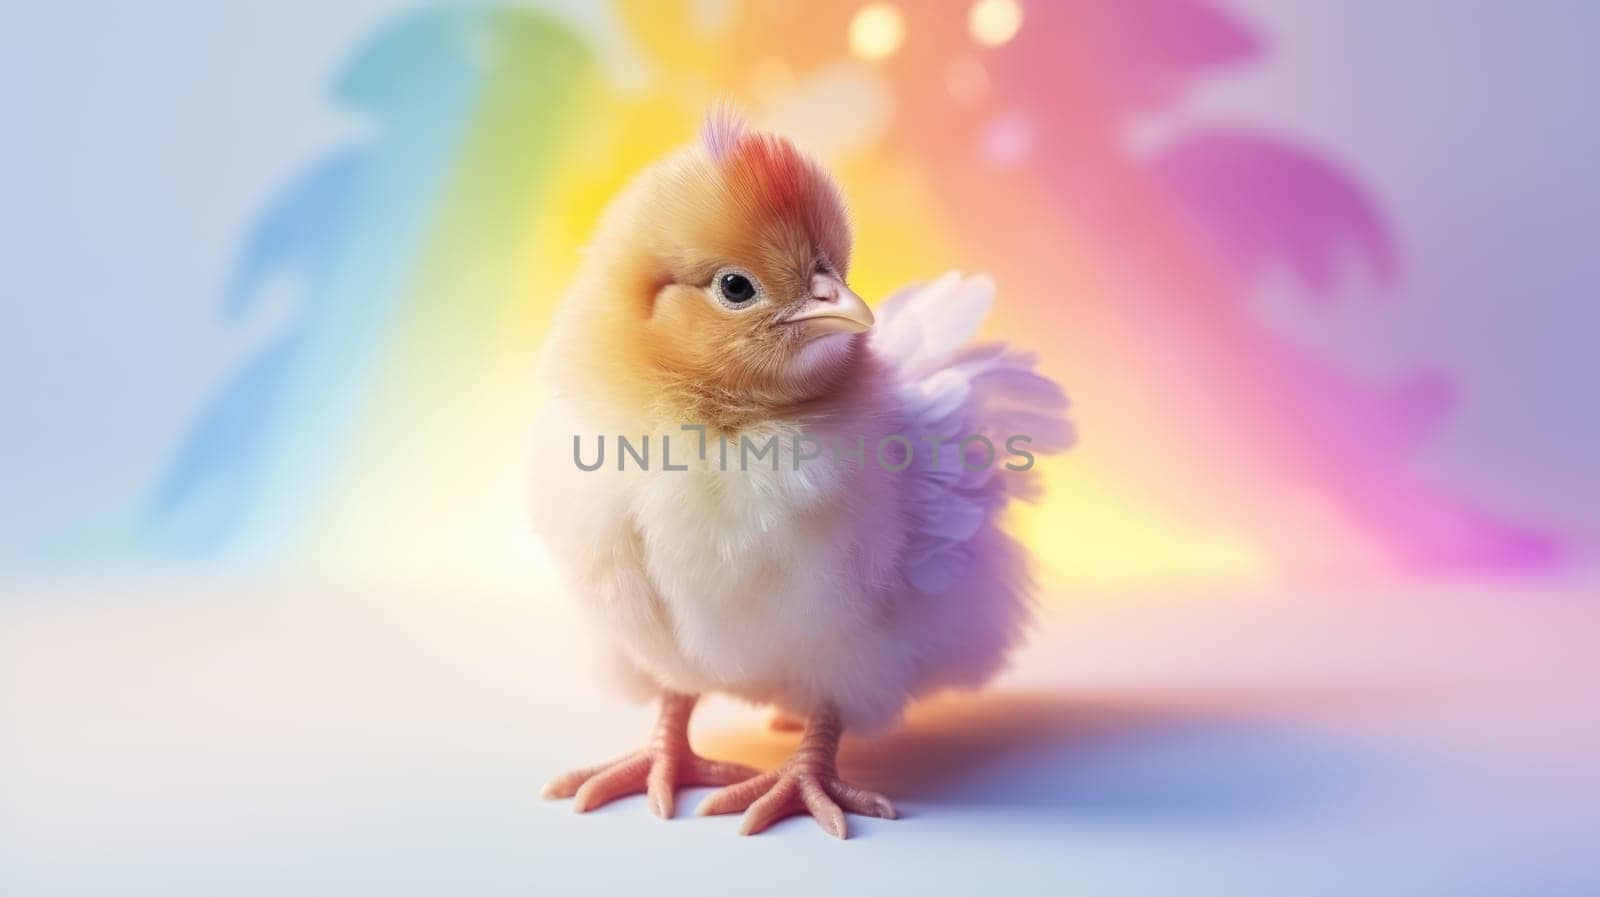 Vibrant chicken with colorful rainbow feathers on bright background by JuliaDorian